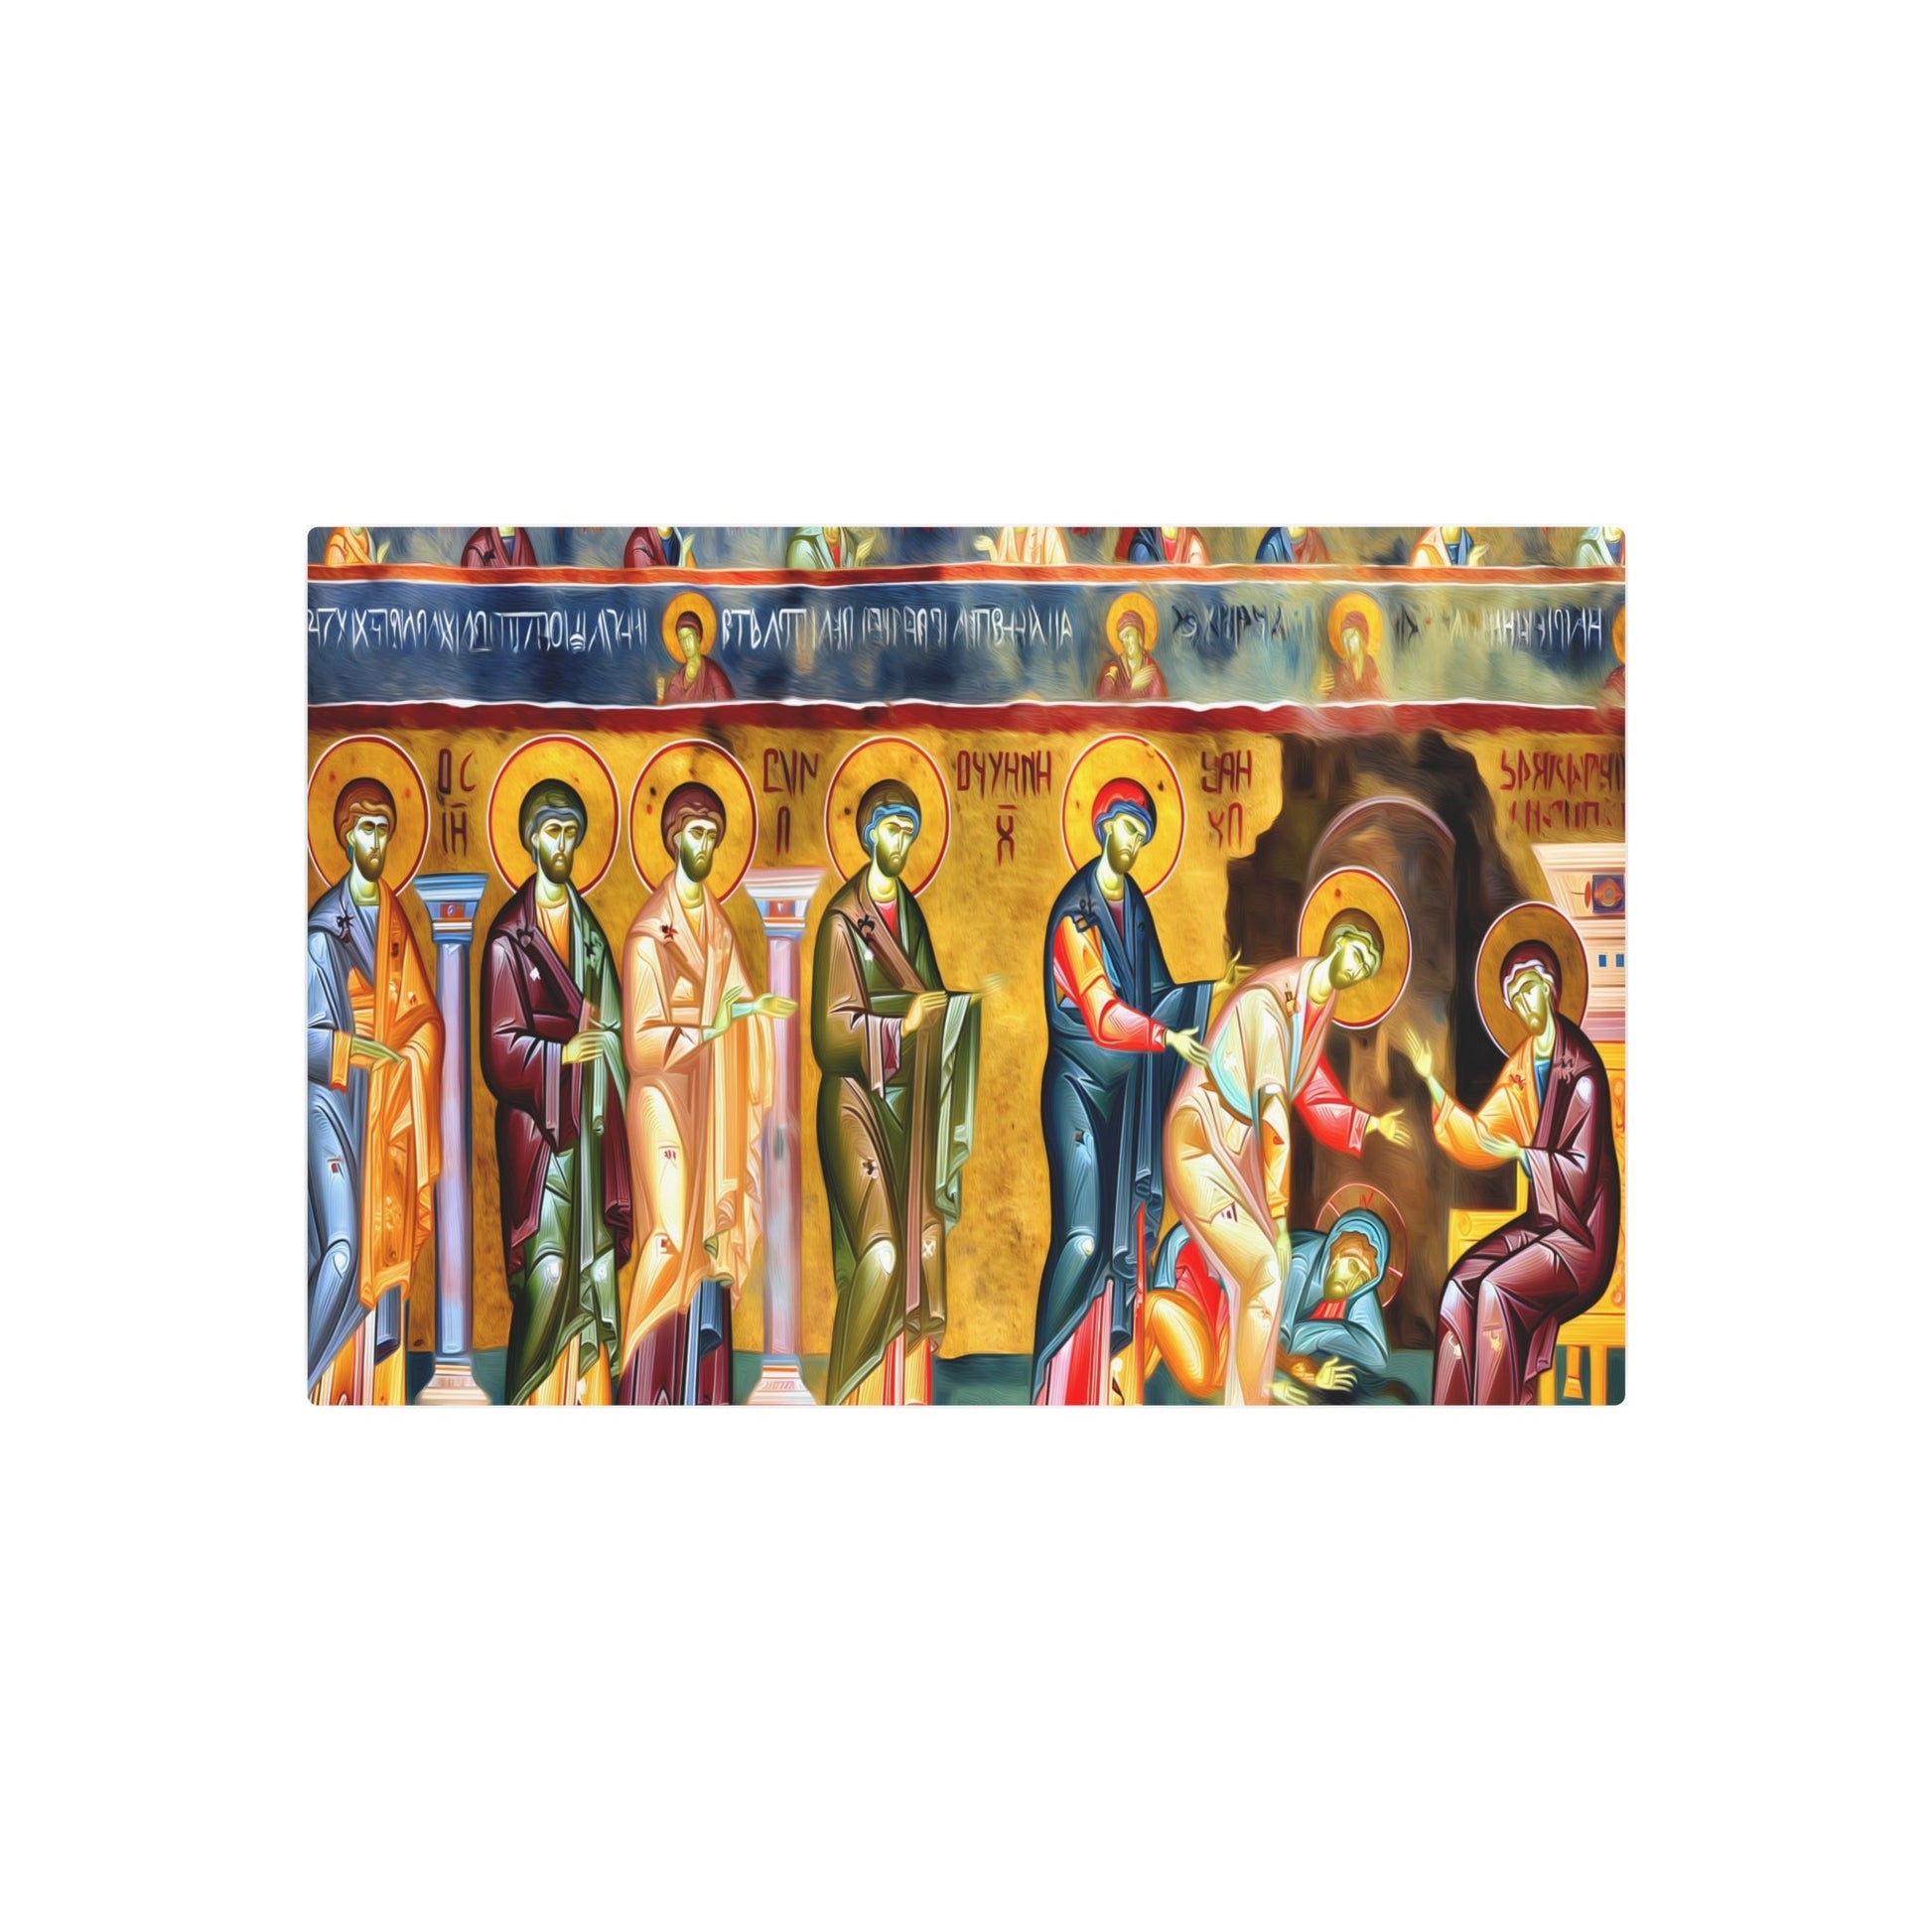 Metal Poster Art | "Prominent Byzantine Art Style Detailed Image: Non-Western & Global Styles Featuring Flat Frontal Figures, Use of Gold, Elaborate Background - Metal Poster Art 30″ x 20″ (Horizontal) 0.12''